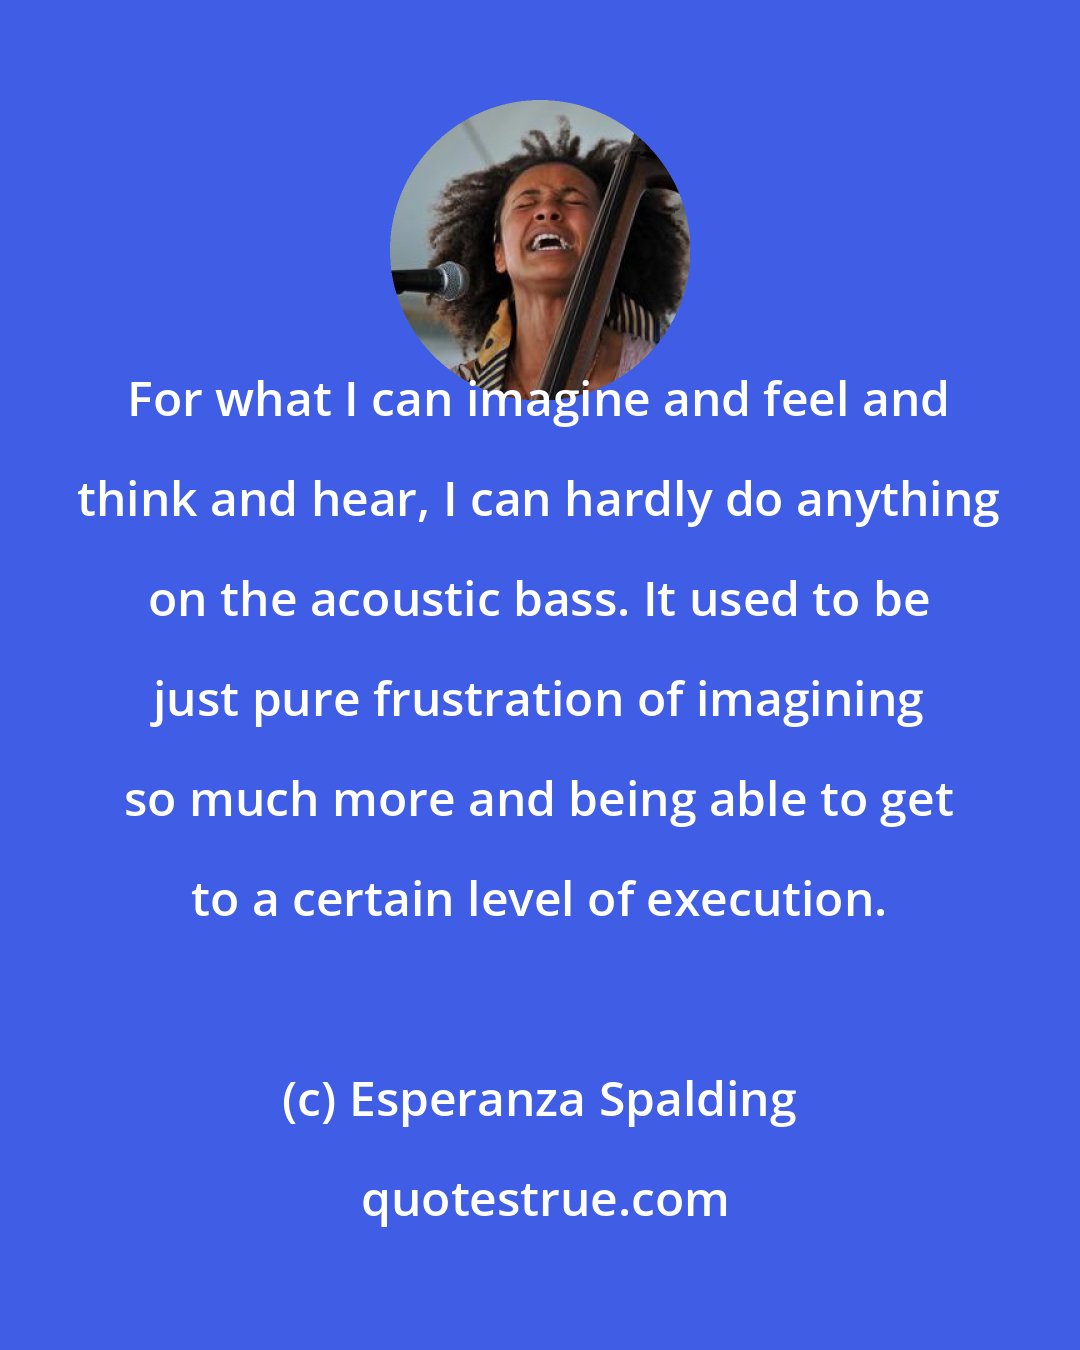 Esperanza Spalding: For what I can imagine and feel and think and hear, I can hardly do anything on the acoustic bass. It used to be just pure frustration of imagining so much more and being able to get to a certain level of execution.